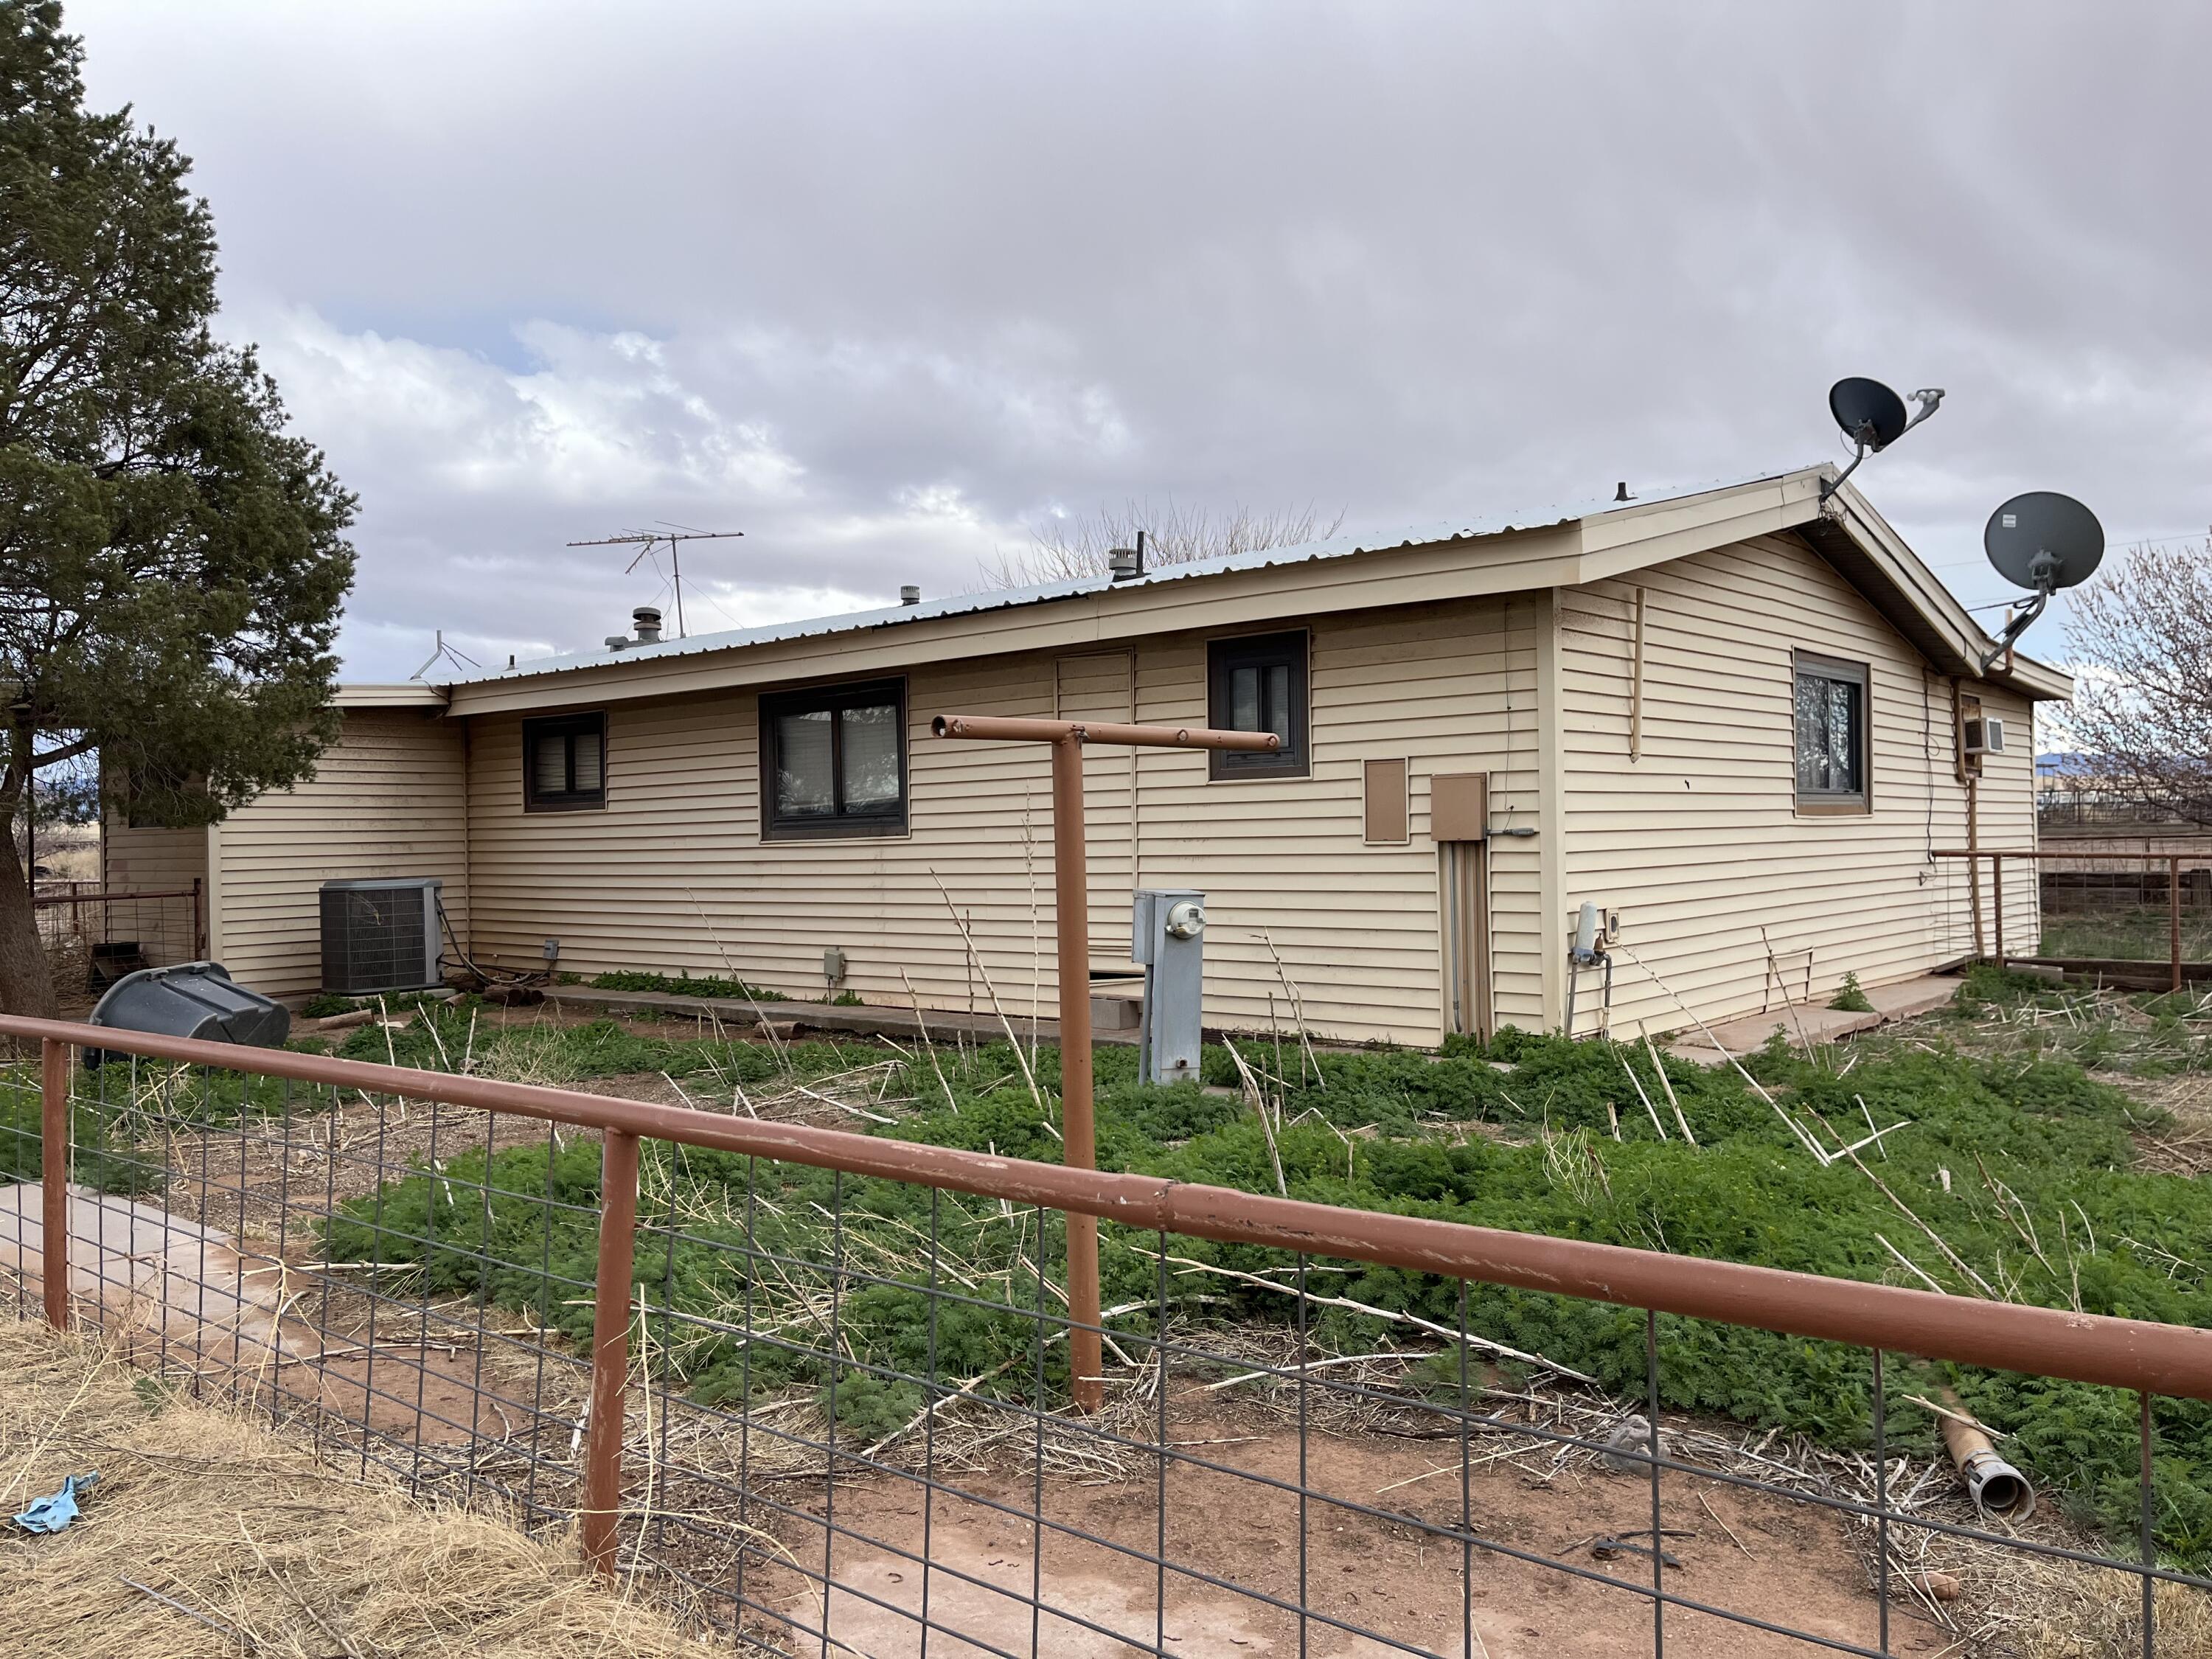 40 Miller Dairy Rd, Veguita, New Mexico 87062, ,Farm,For Sale,40 Miller Dairy Rd,1031599